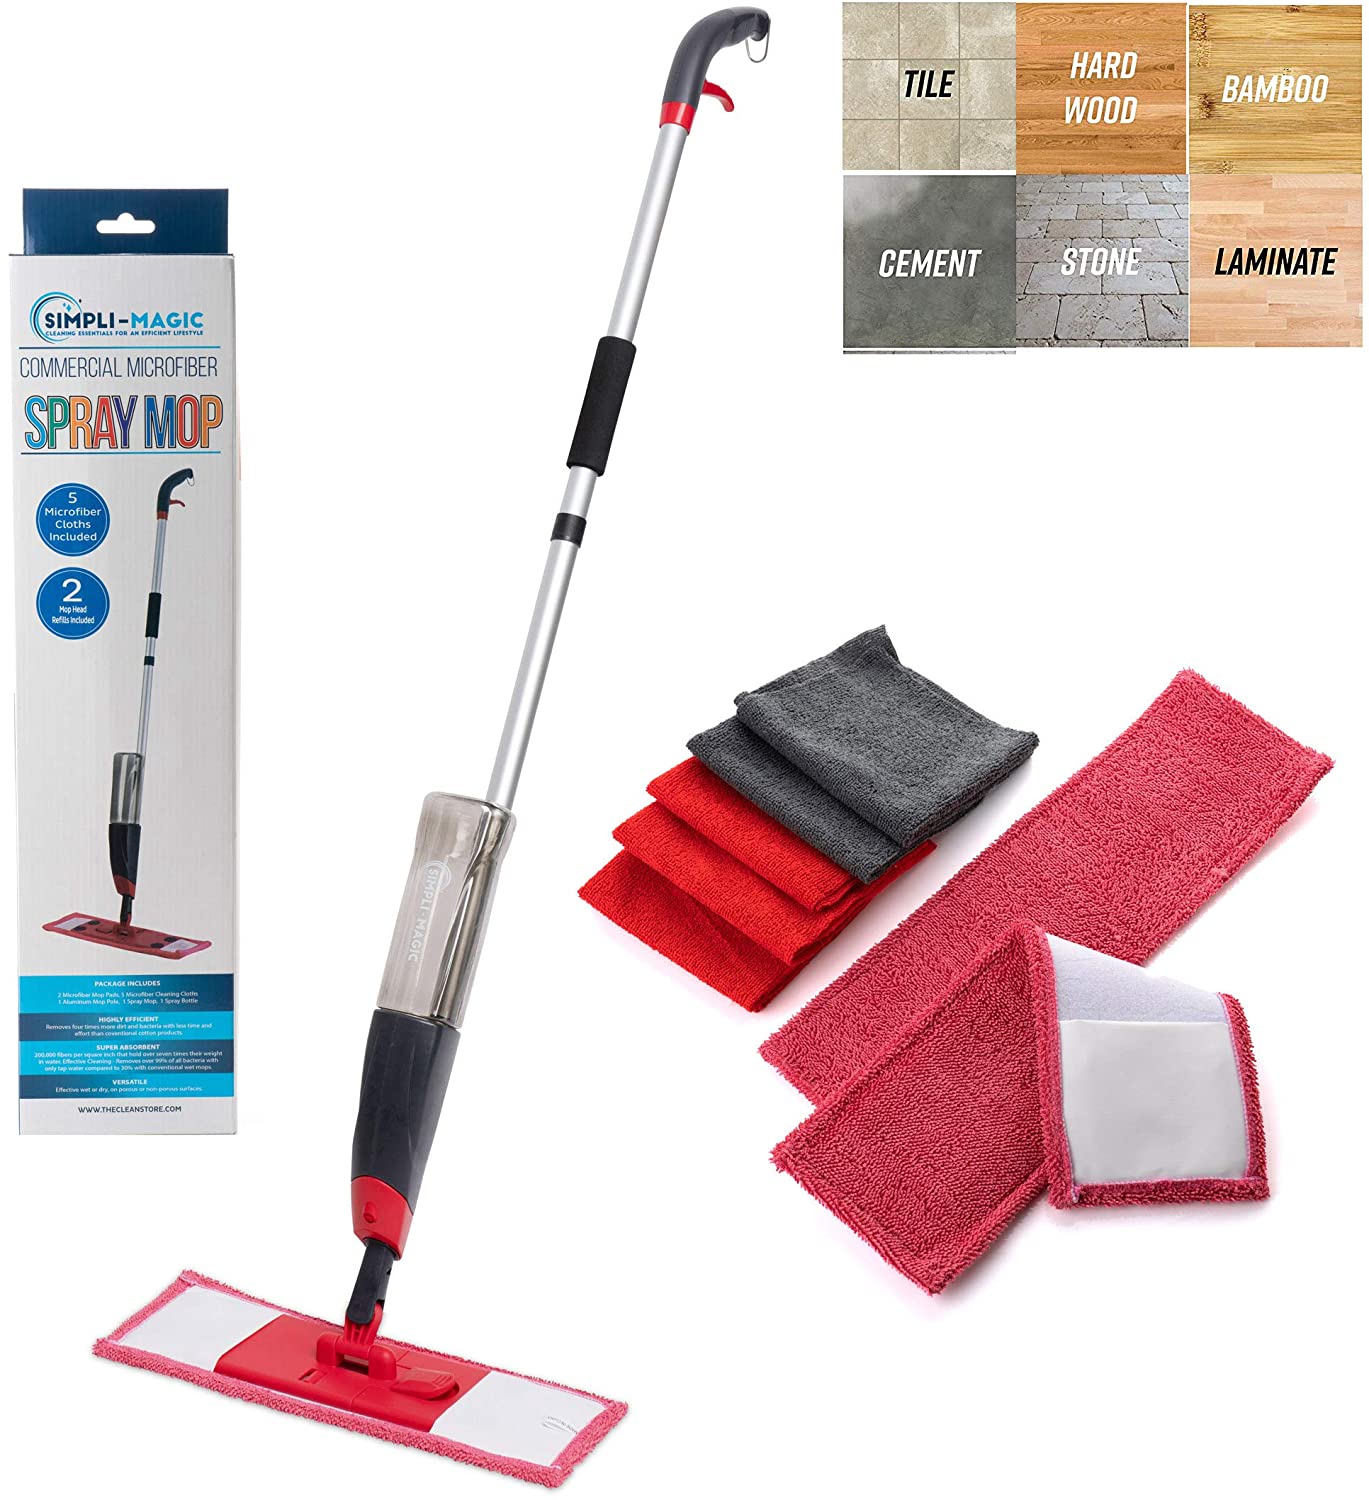 Rubbermaid Reveal Spray Microfiber Floor Cleaning Kit for Laminate &  Hardwood Floors, Spray Mop with Reusable Washable Pads, Commercial 